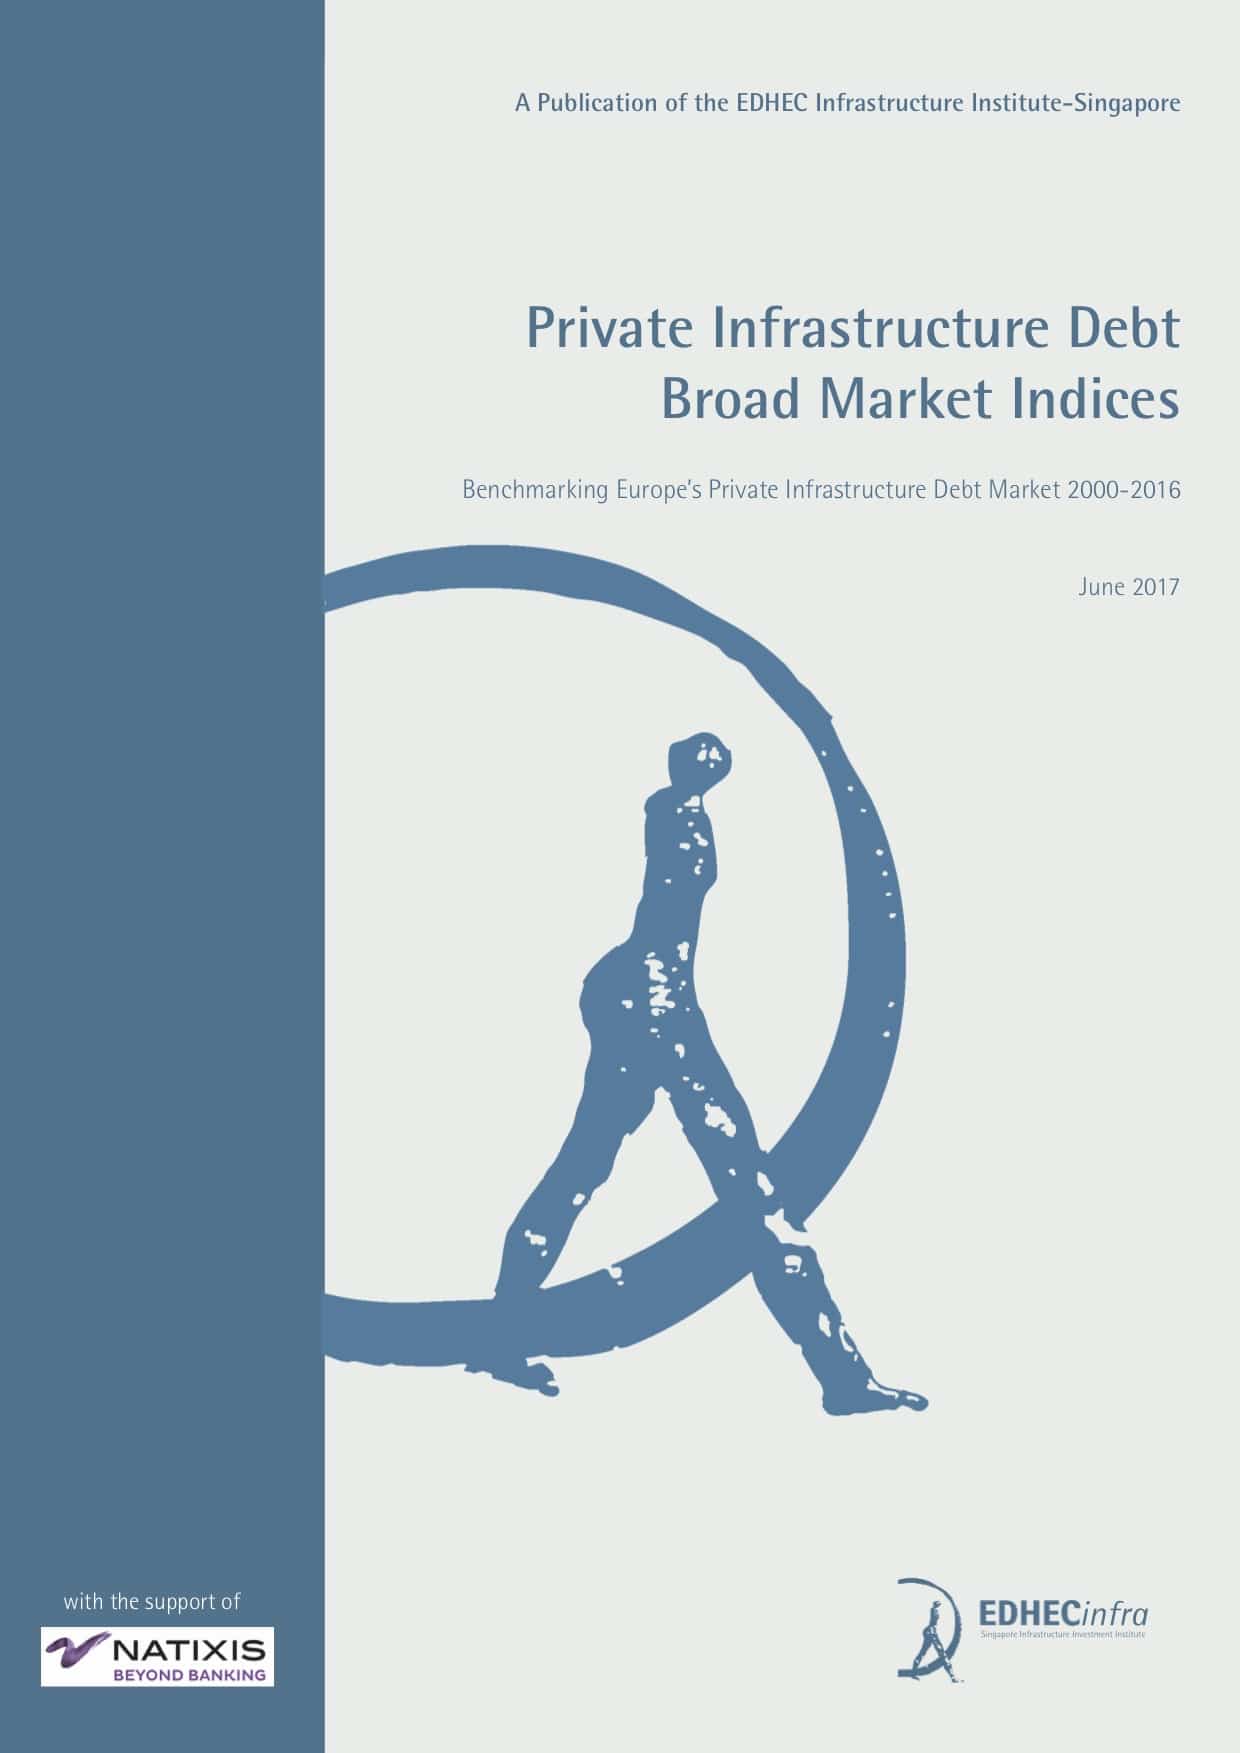 Private Infrastructure Debt Broad Market Indices (Europe, 2000-2016)